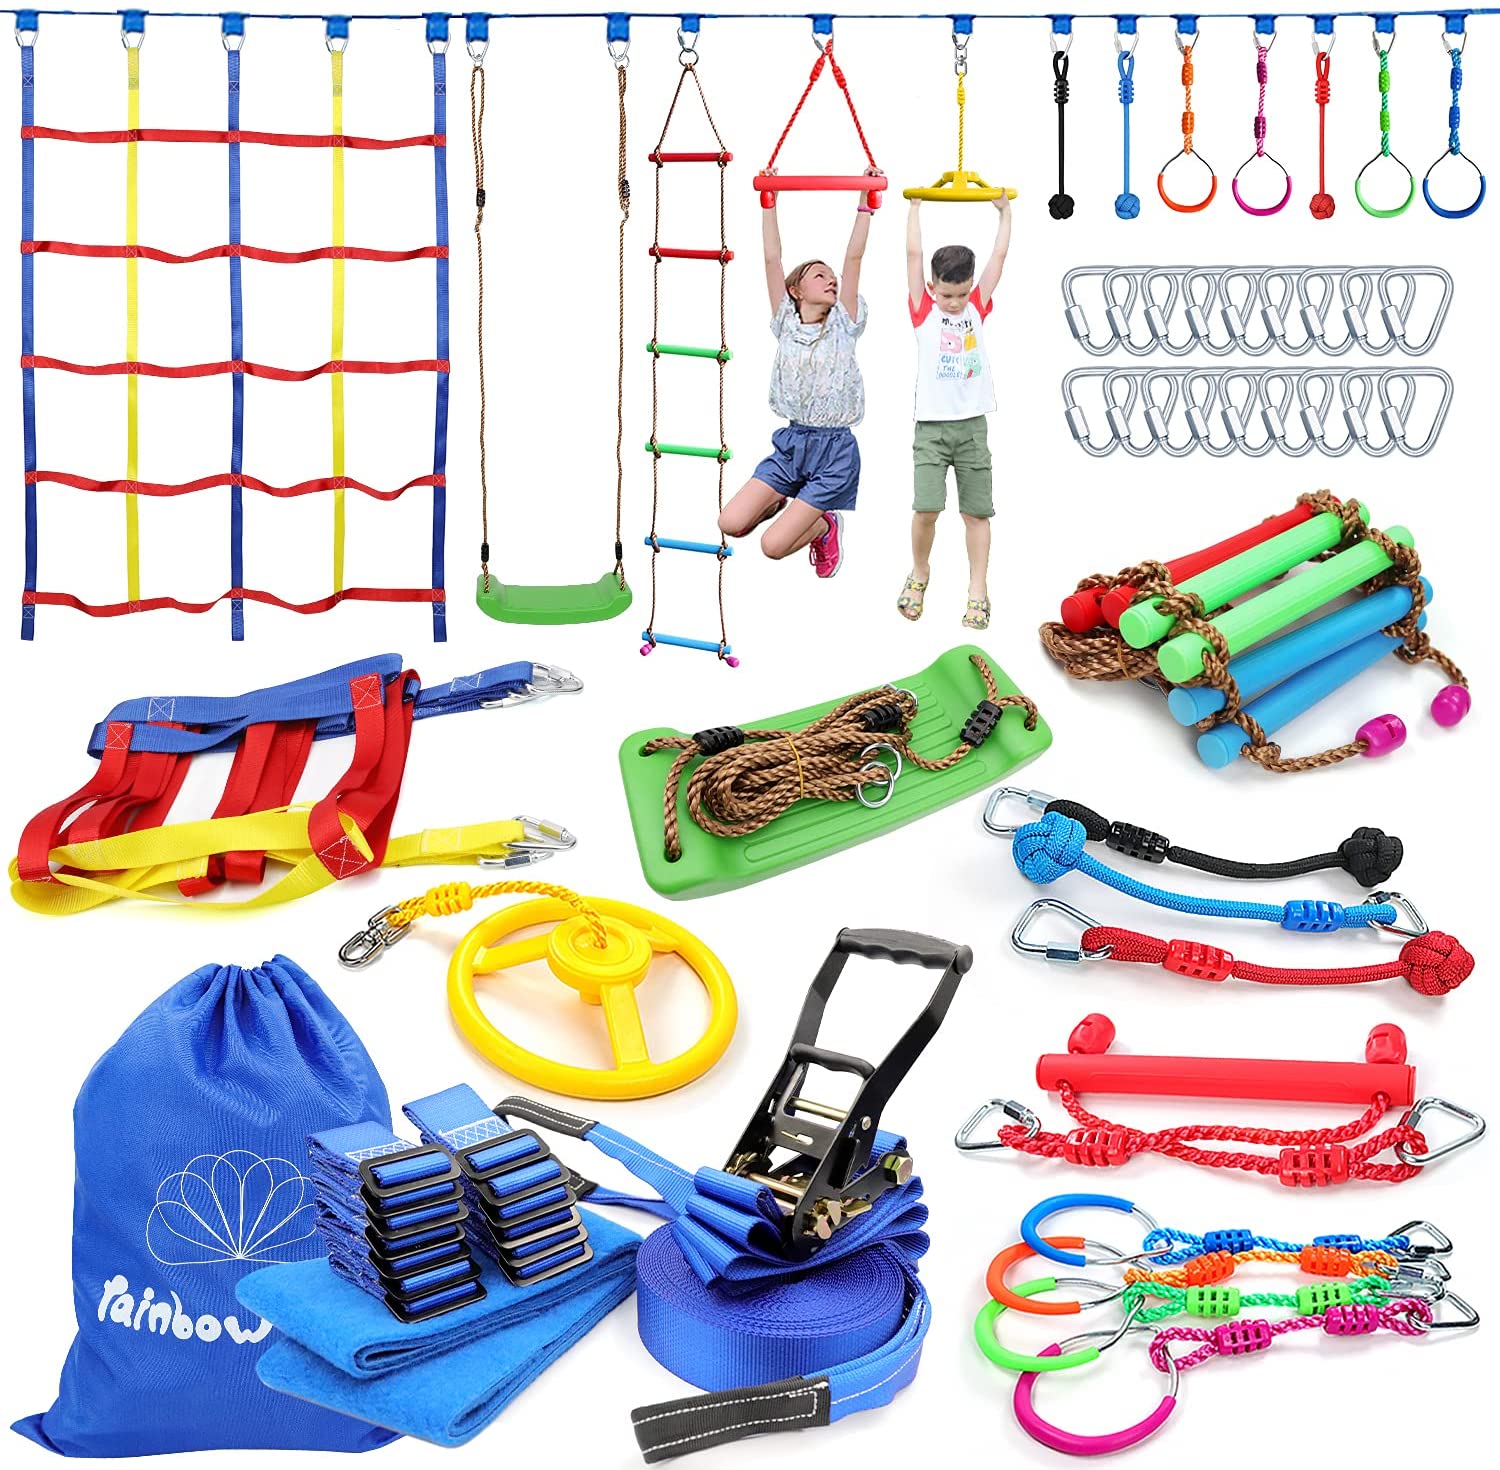 Review of Rainbow Craft 50ft Ninja Warrior Obstacle Course for Kids